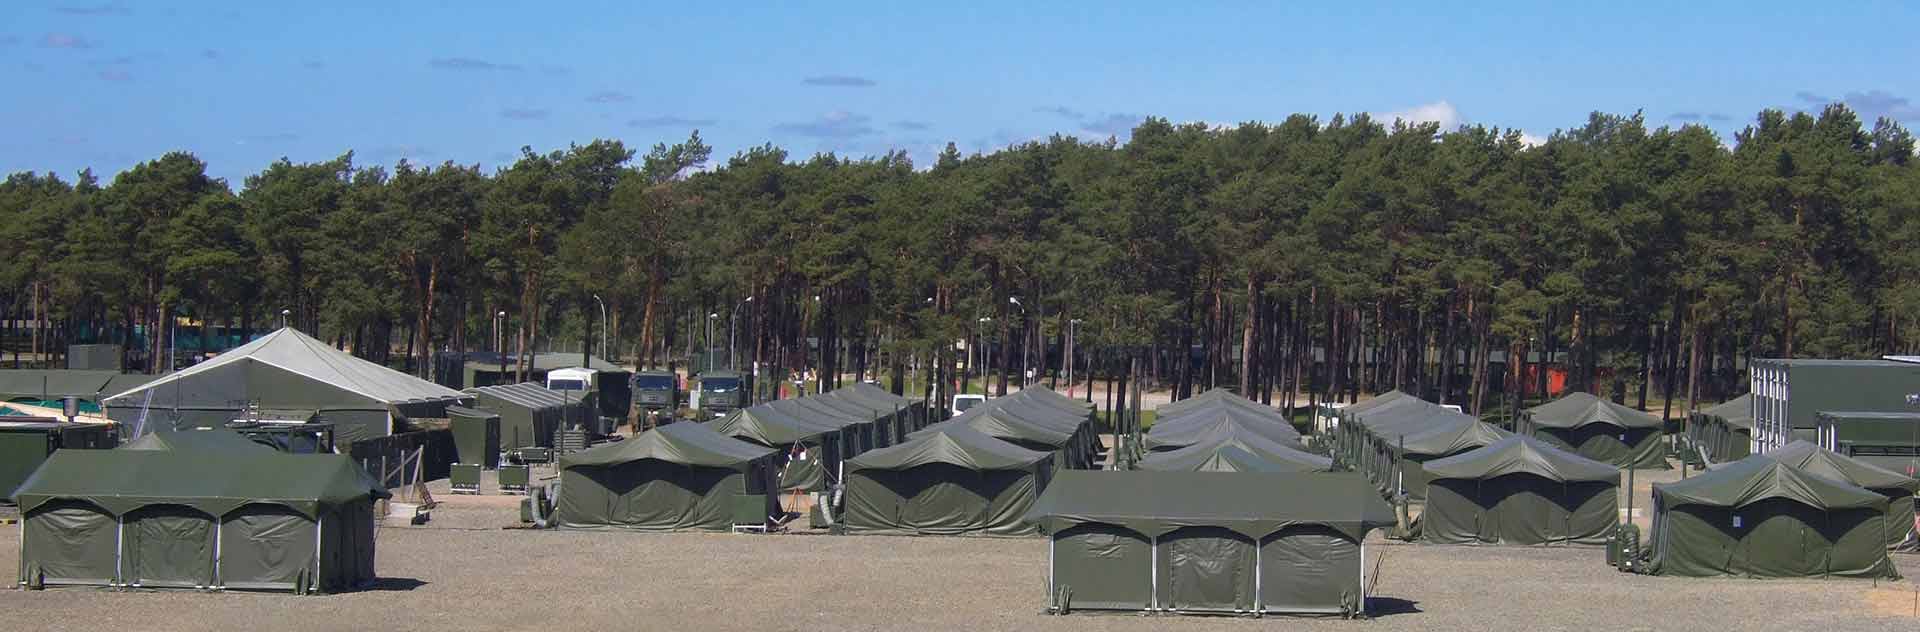 Field camp planned and constructed using the Airbus Planning and Exploration Tool (PET)